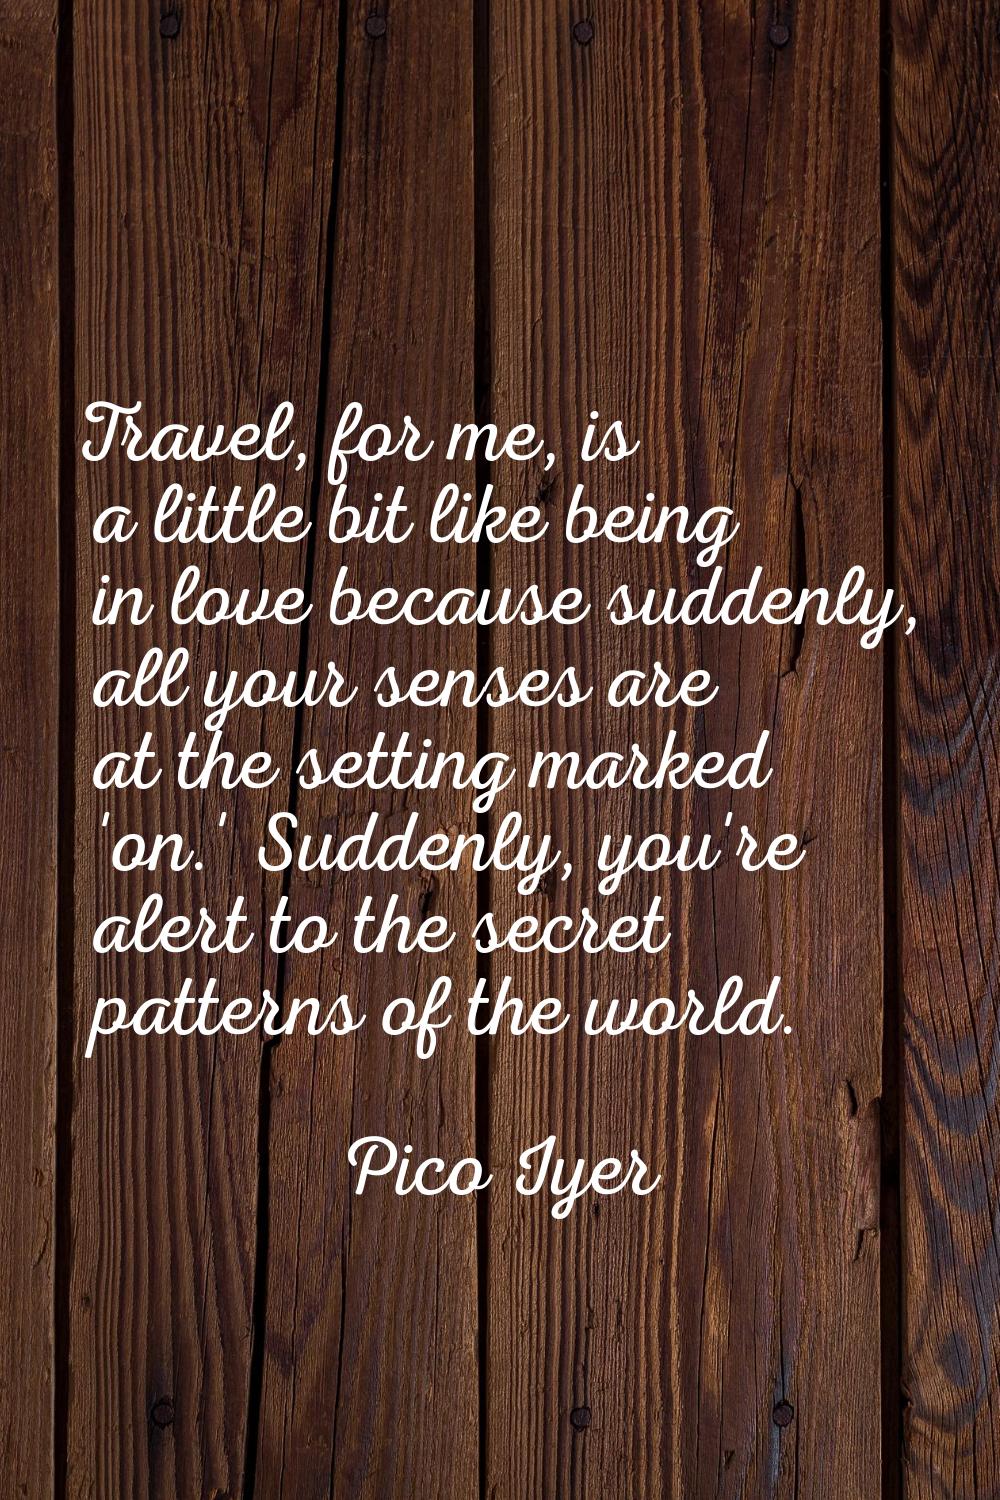 Travel, for me, is a little bit like being in love because suddenly, all your senses are at the set